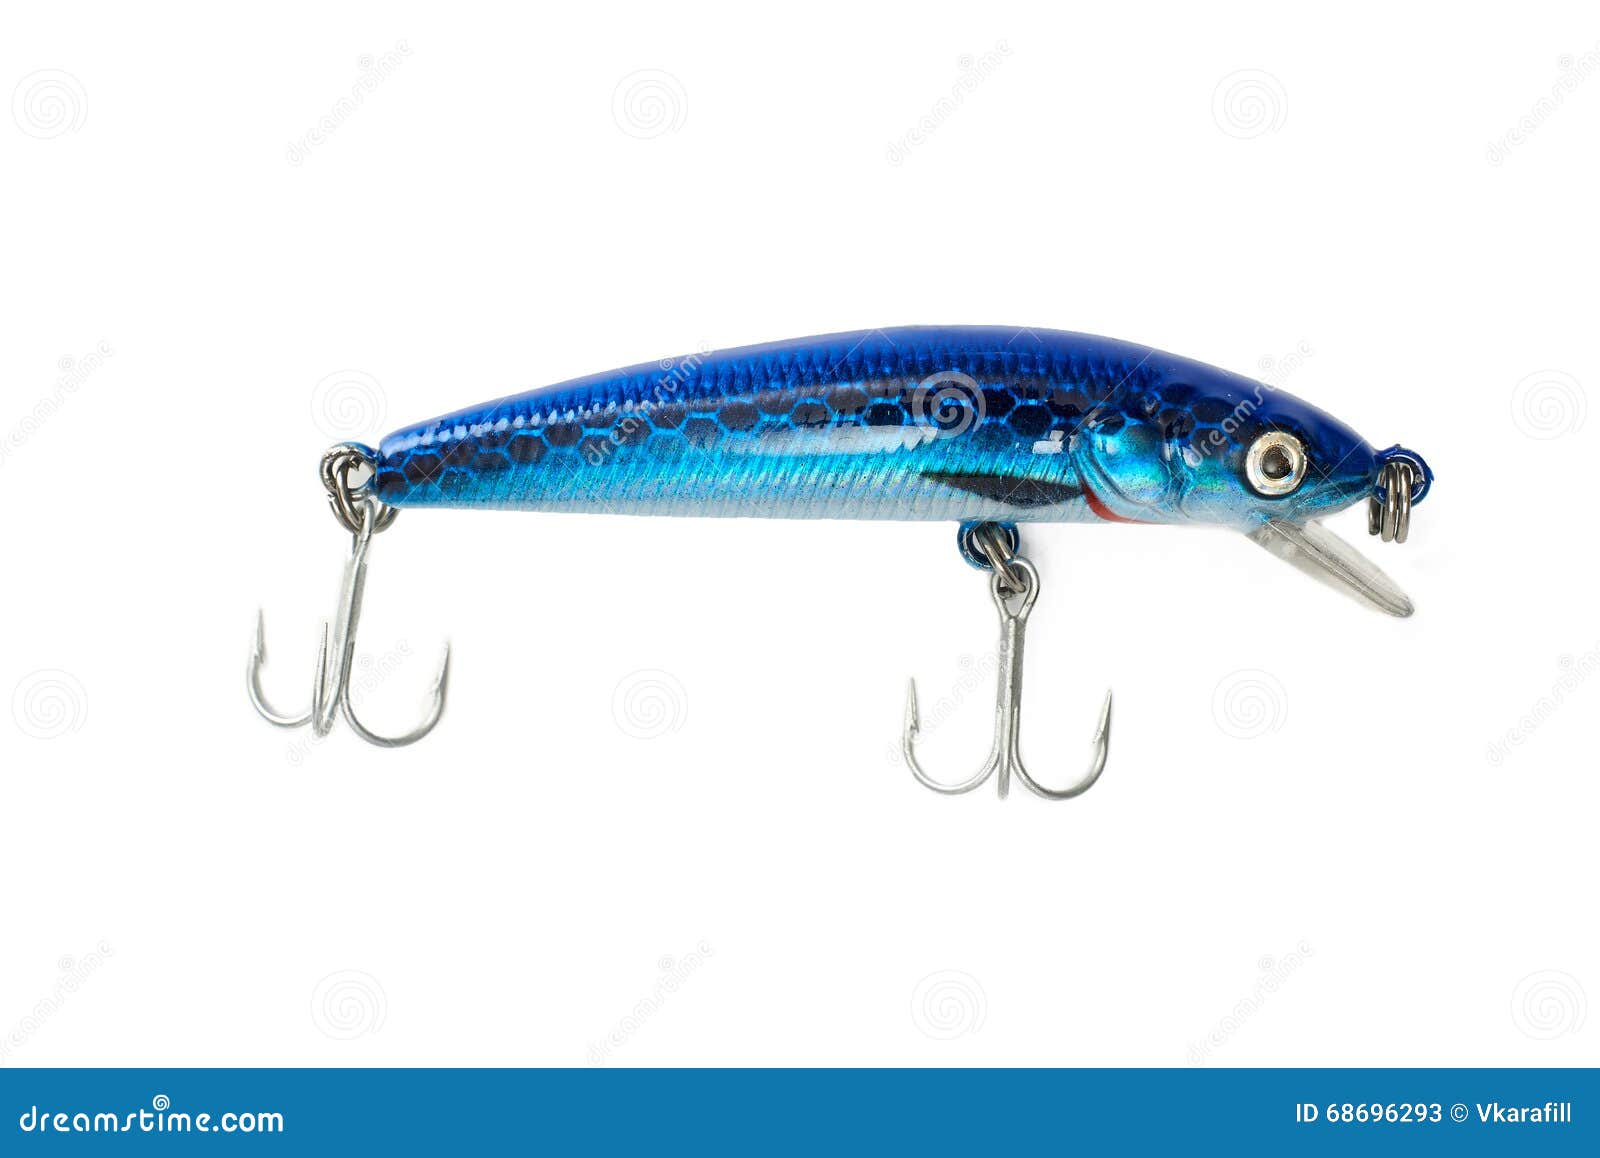 https://thumbs.dreamstime.com/z/fishing-lure-isolated-white-background-68696293.jpg